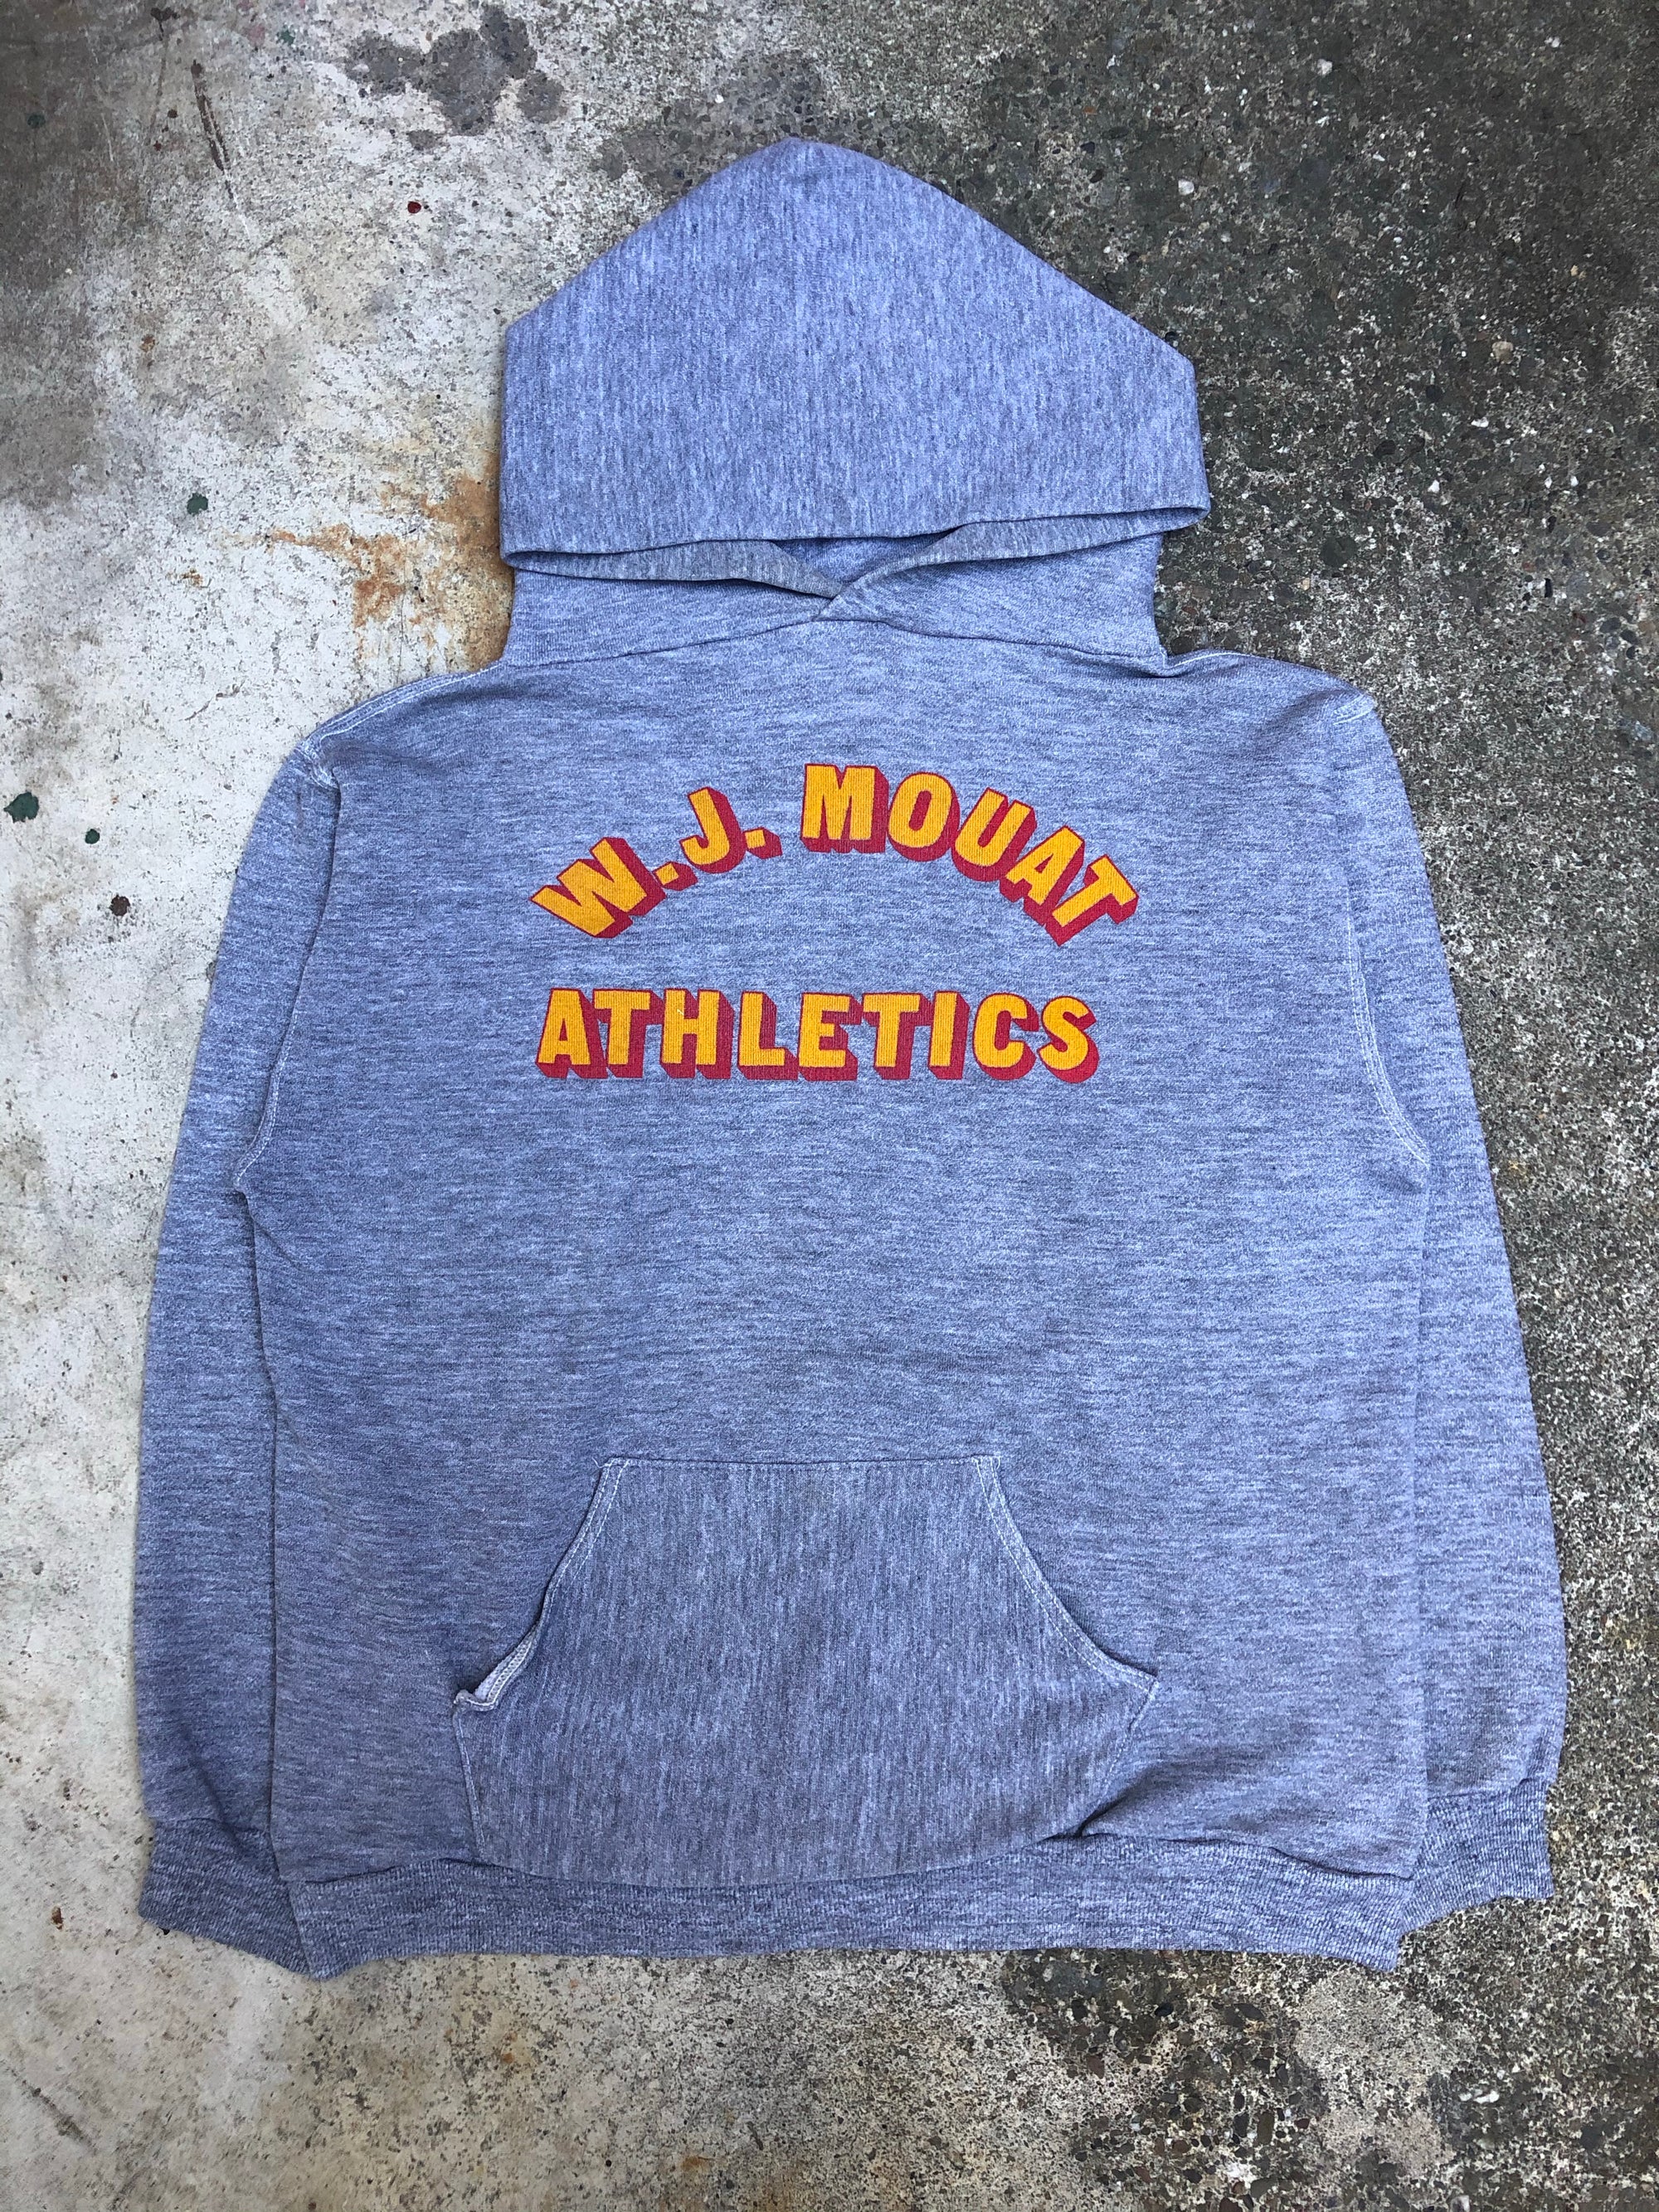 1970s Russell “WJ Mouat Athletics” Hoodie (M)